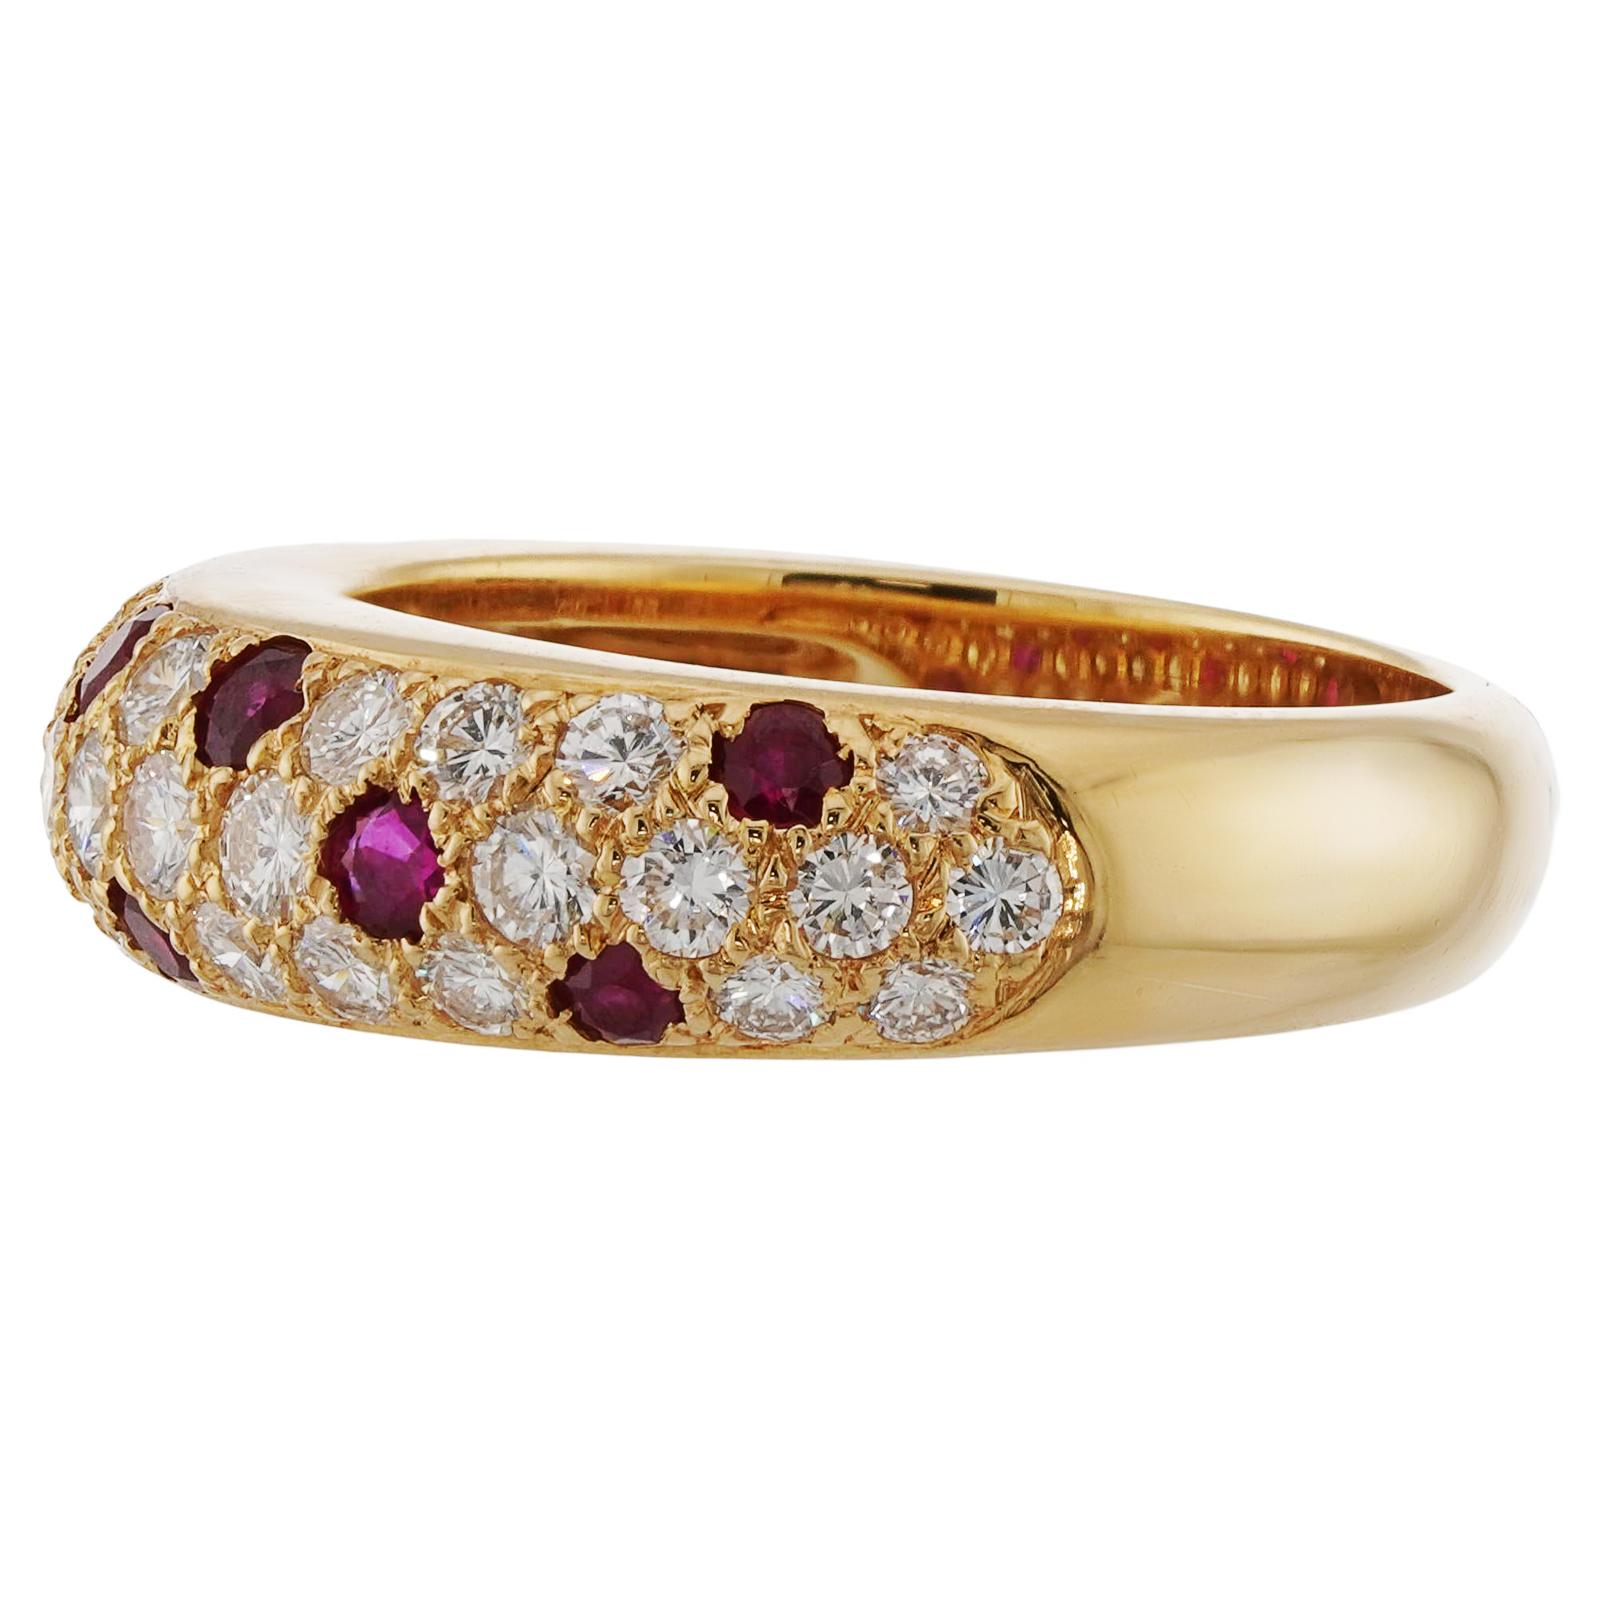 CARTIER Diamond Ruby 18k Yellow Gold Band Ring In Excellent Condition For Sale In New York, NY